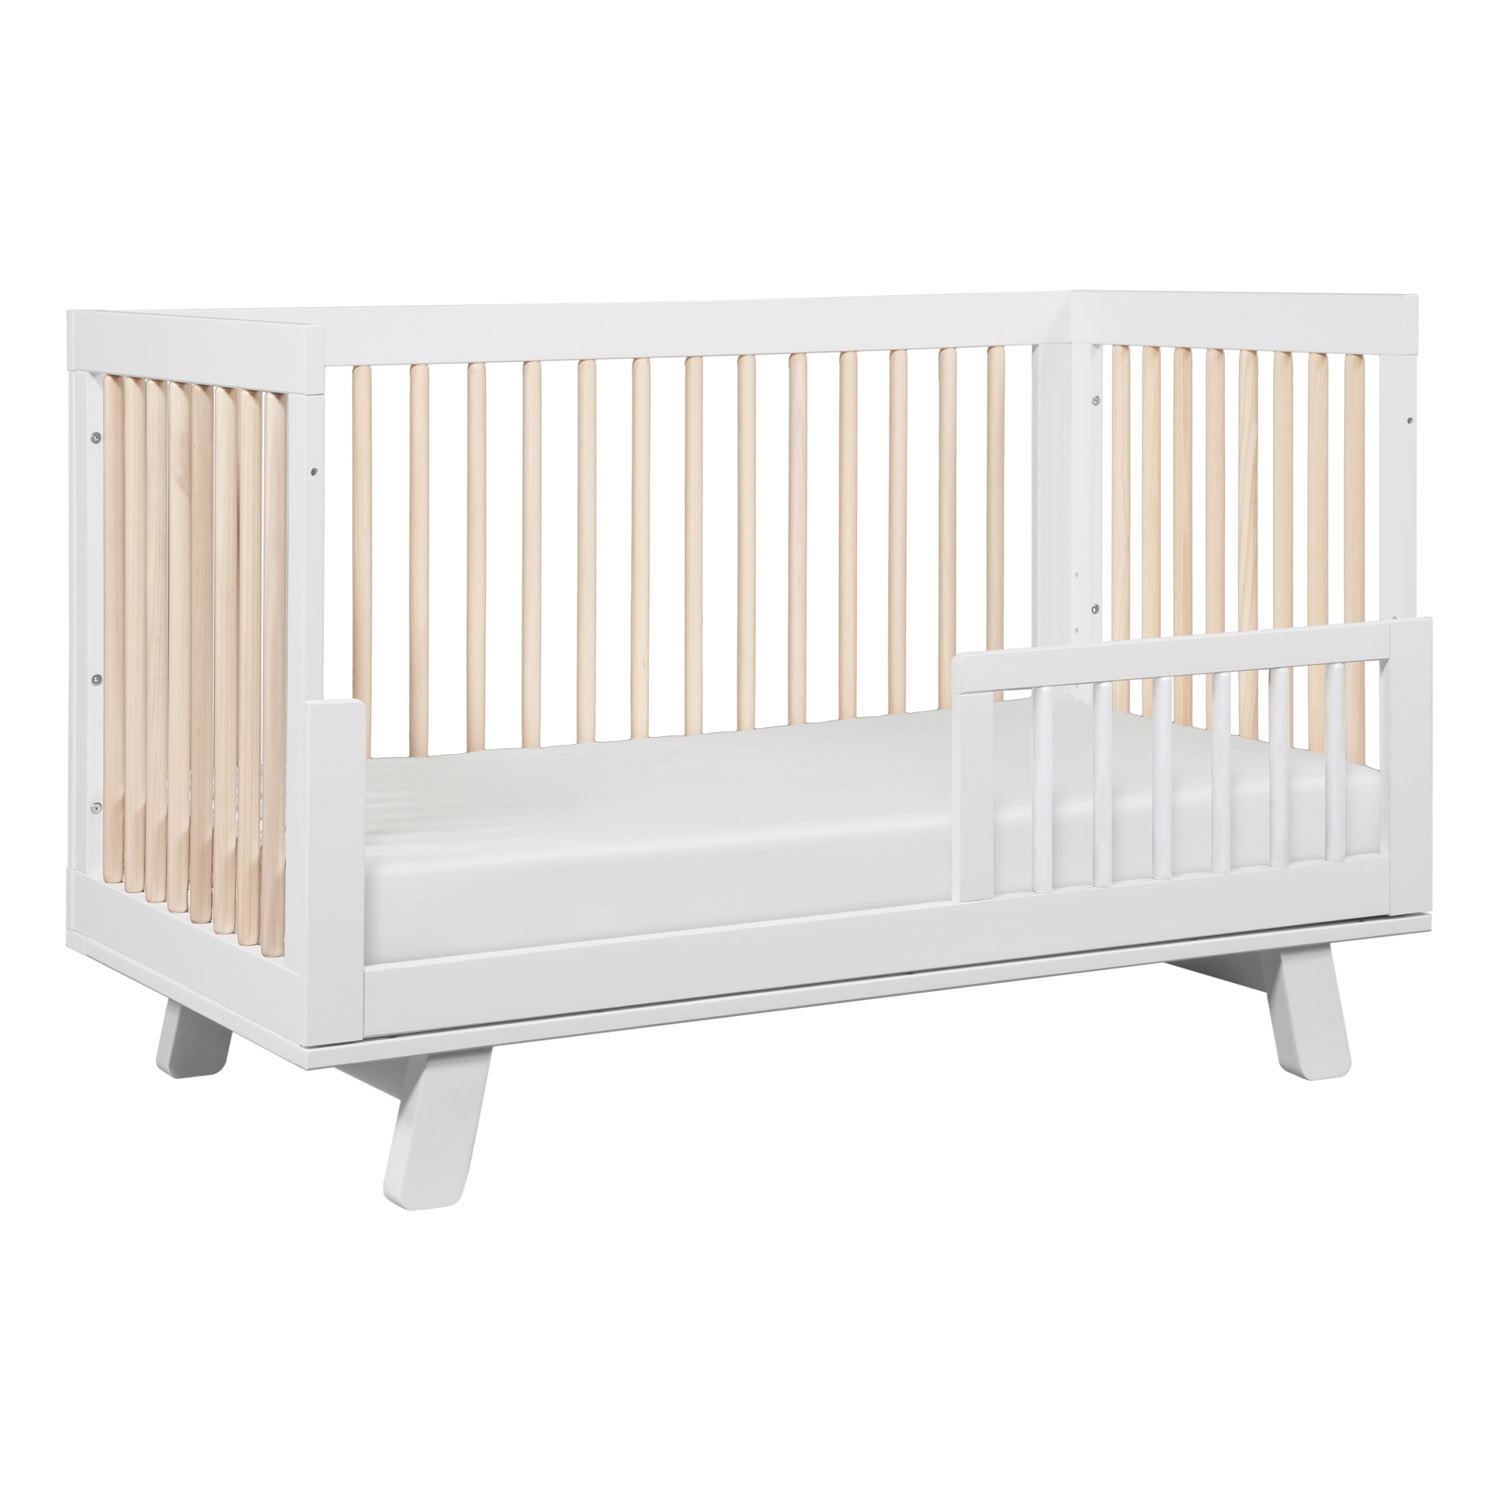 Babyletto Hudson Mid Century Modern White Washed Brown Convertible Crib - Image 2